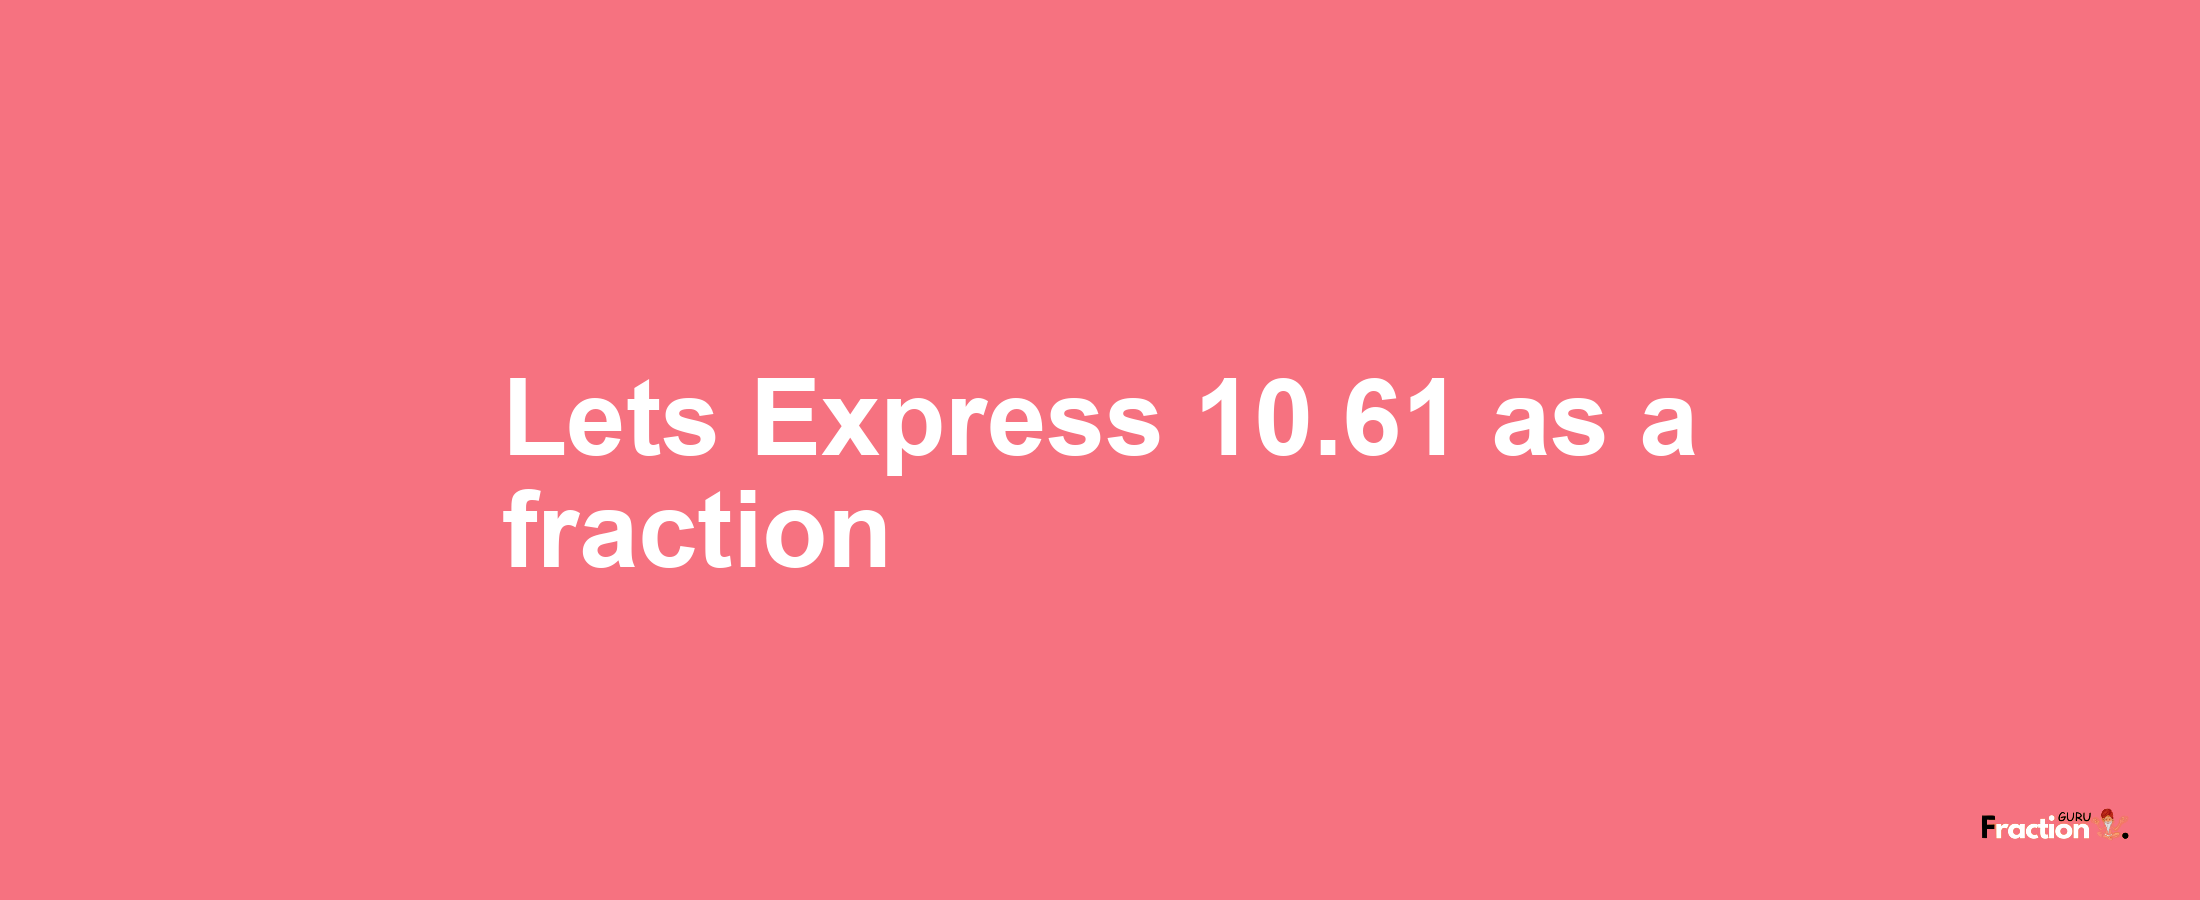 Lets Express 10.61 as afraction